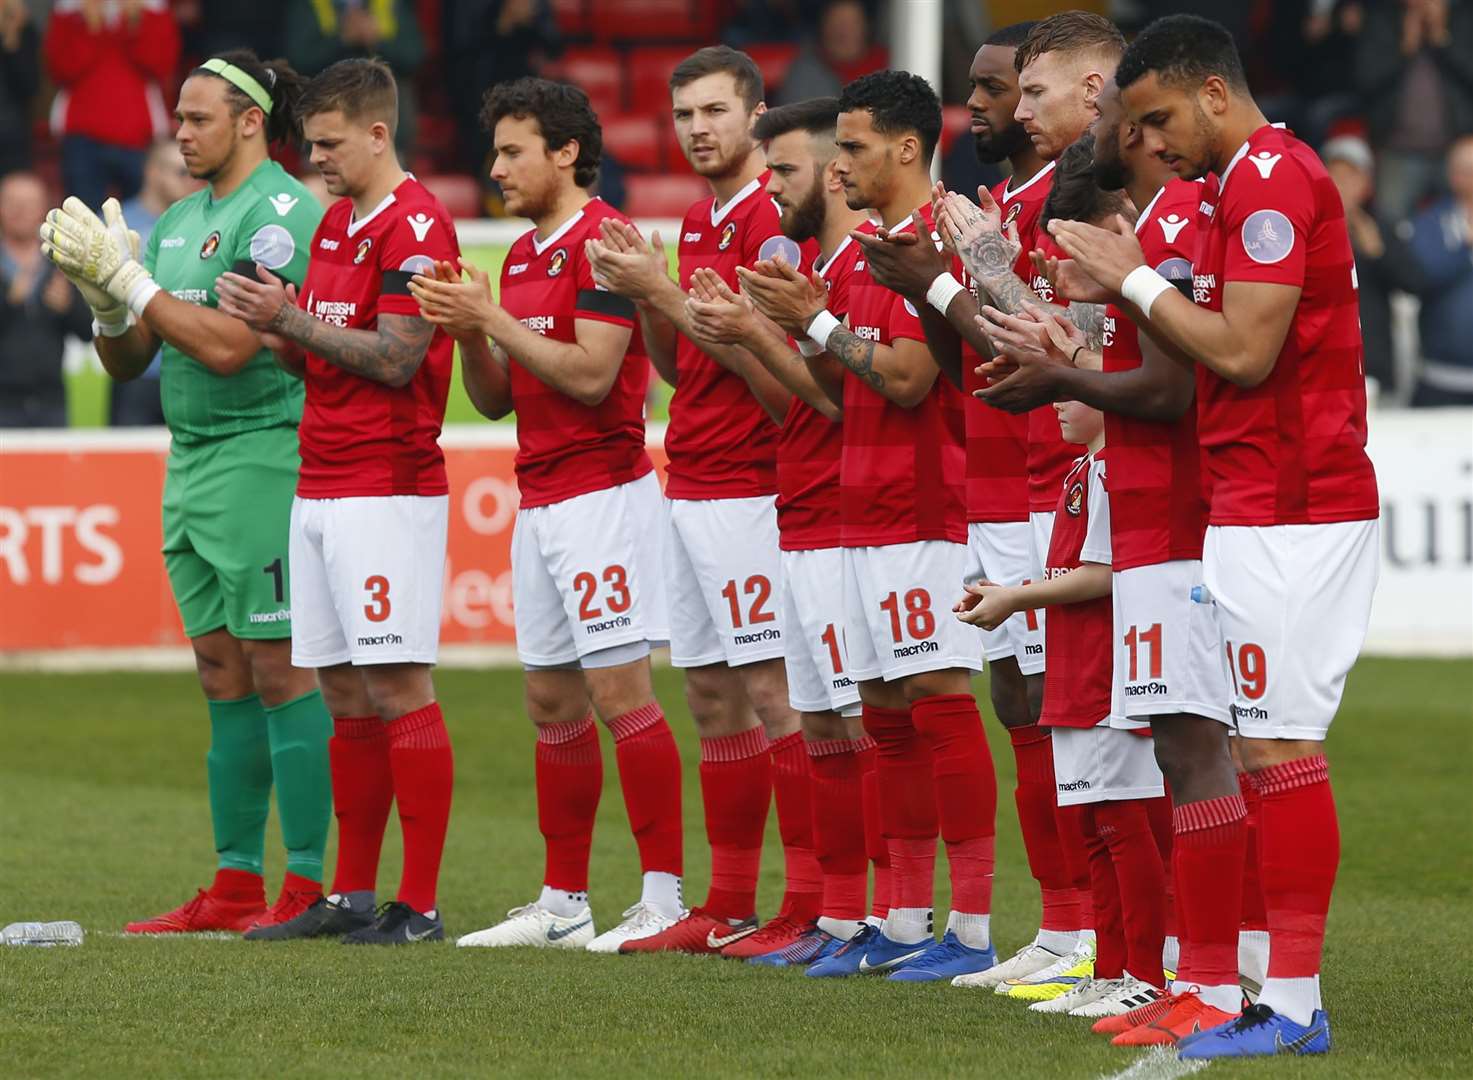 Ebbsfleet's players have not been paid on time again this month. Picture: Andy Jones